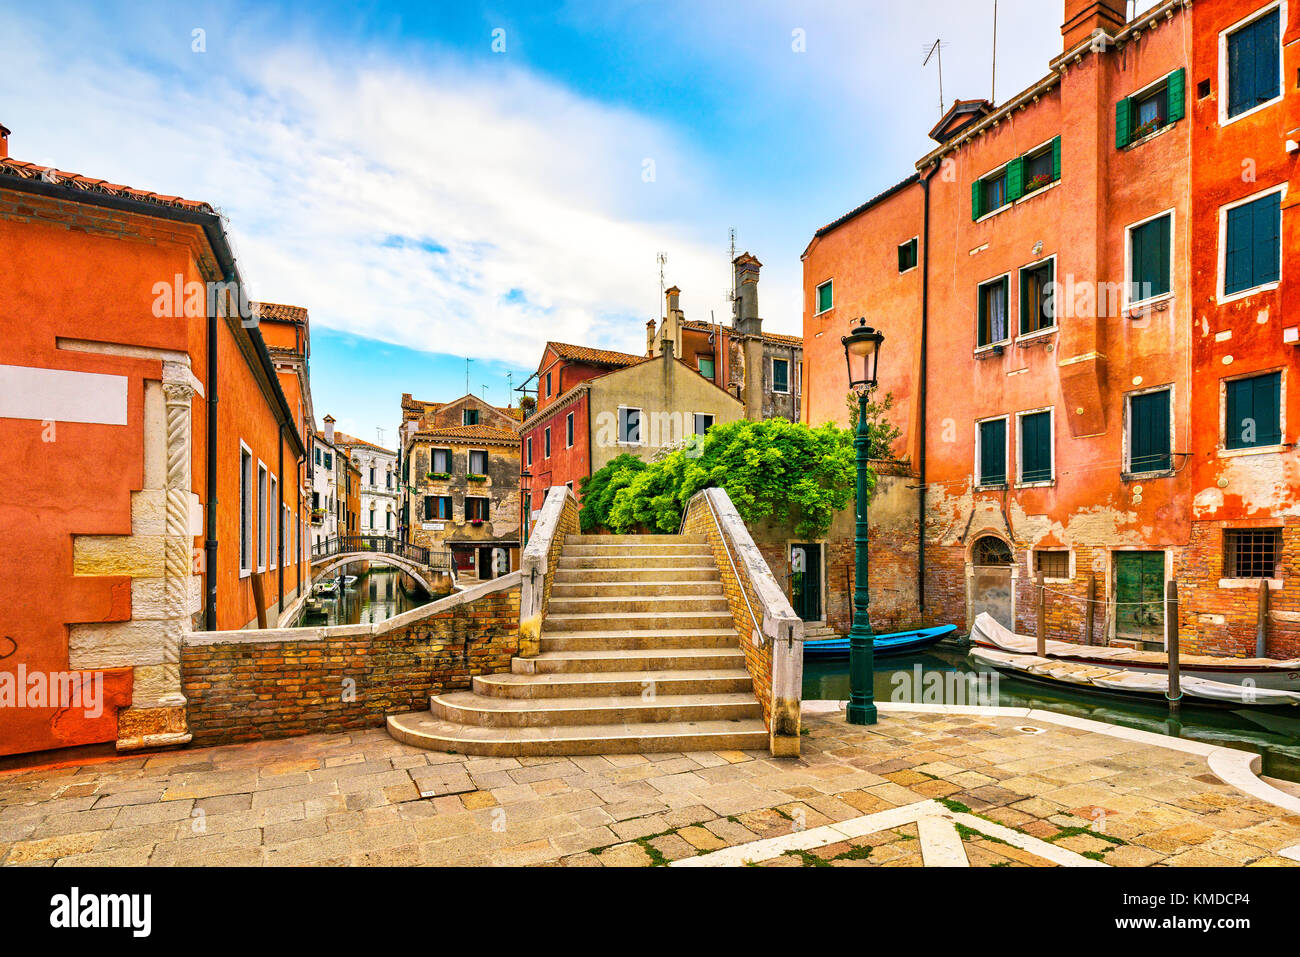 Venice cityscape, narrow water canal, bridge, boats, and traditional buildings. Italy, Europe. Stock Photo